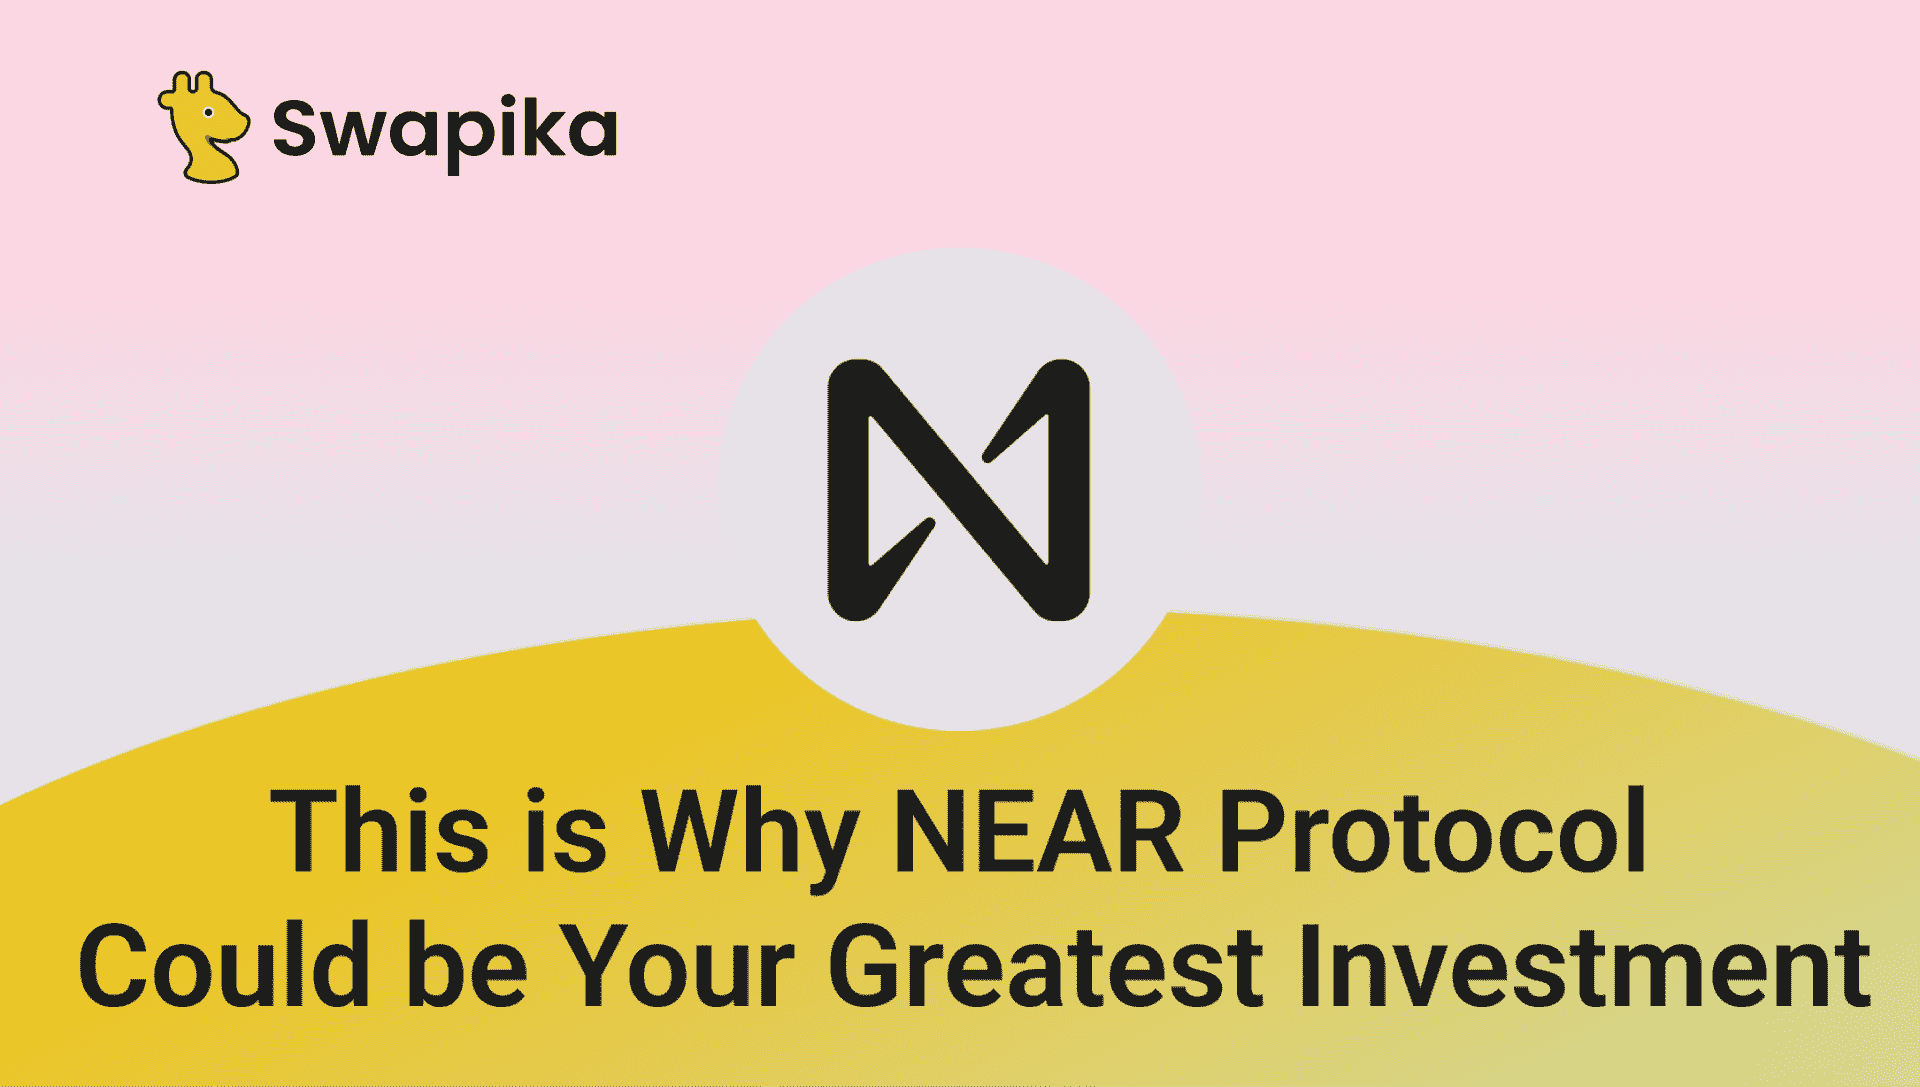 This is Why NEAR Protocol Could be Your Greatest Investment